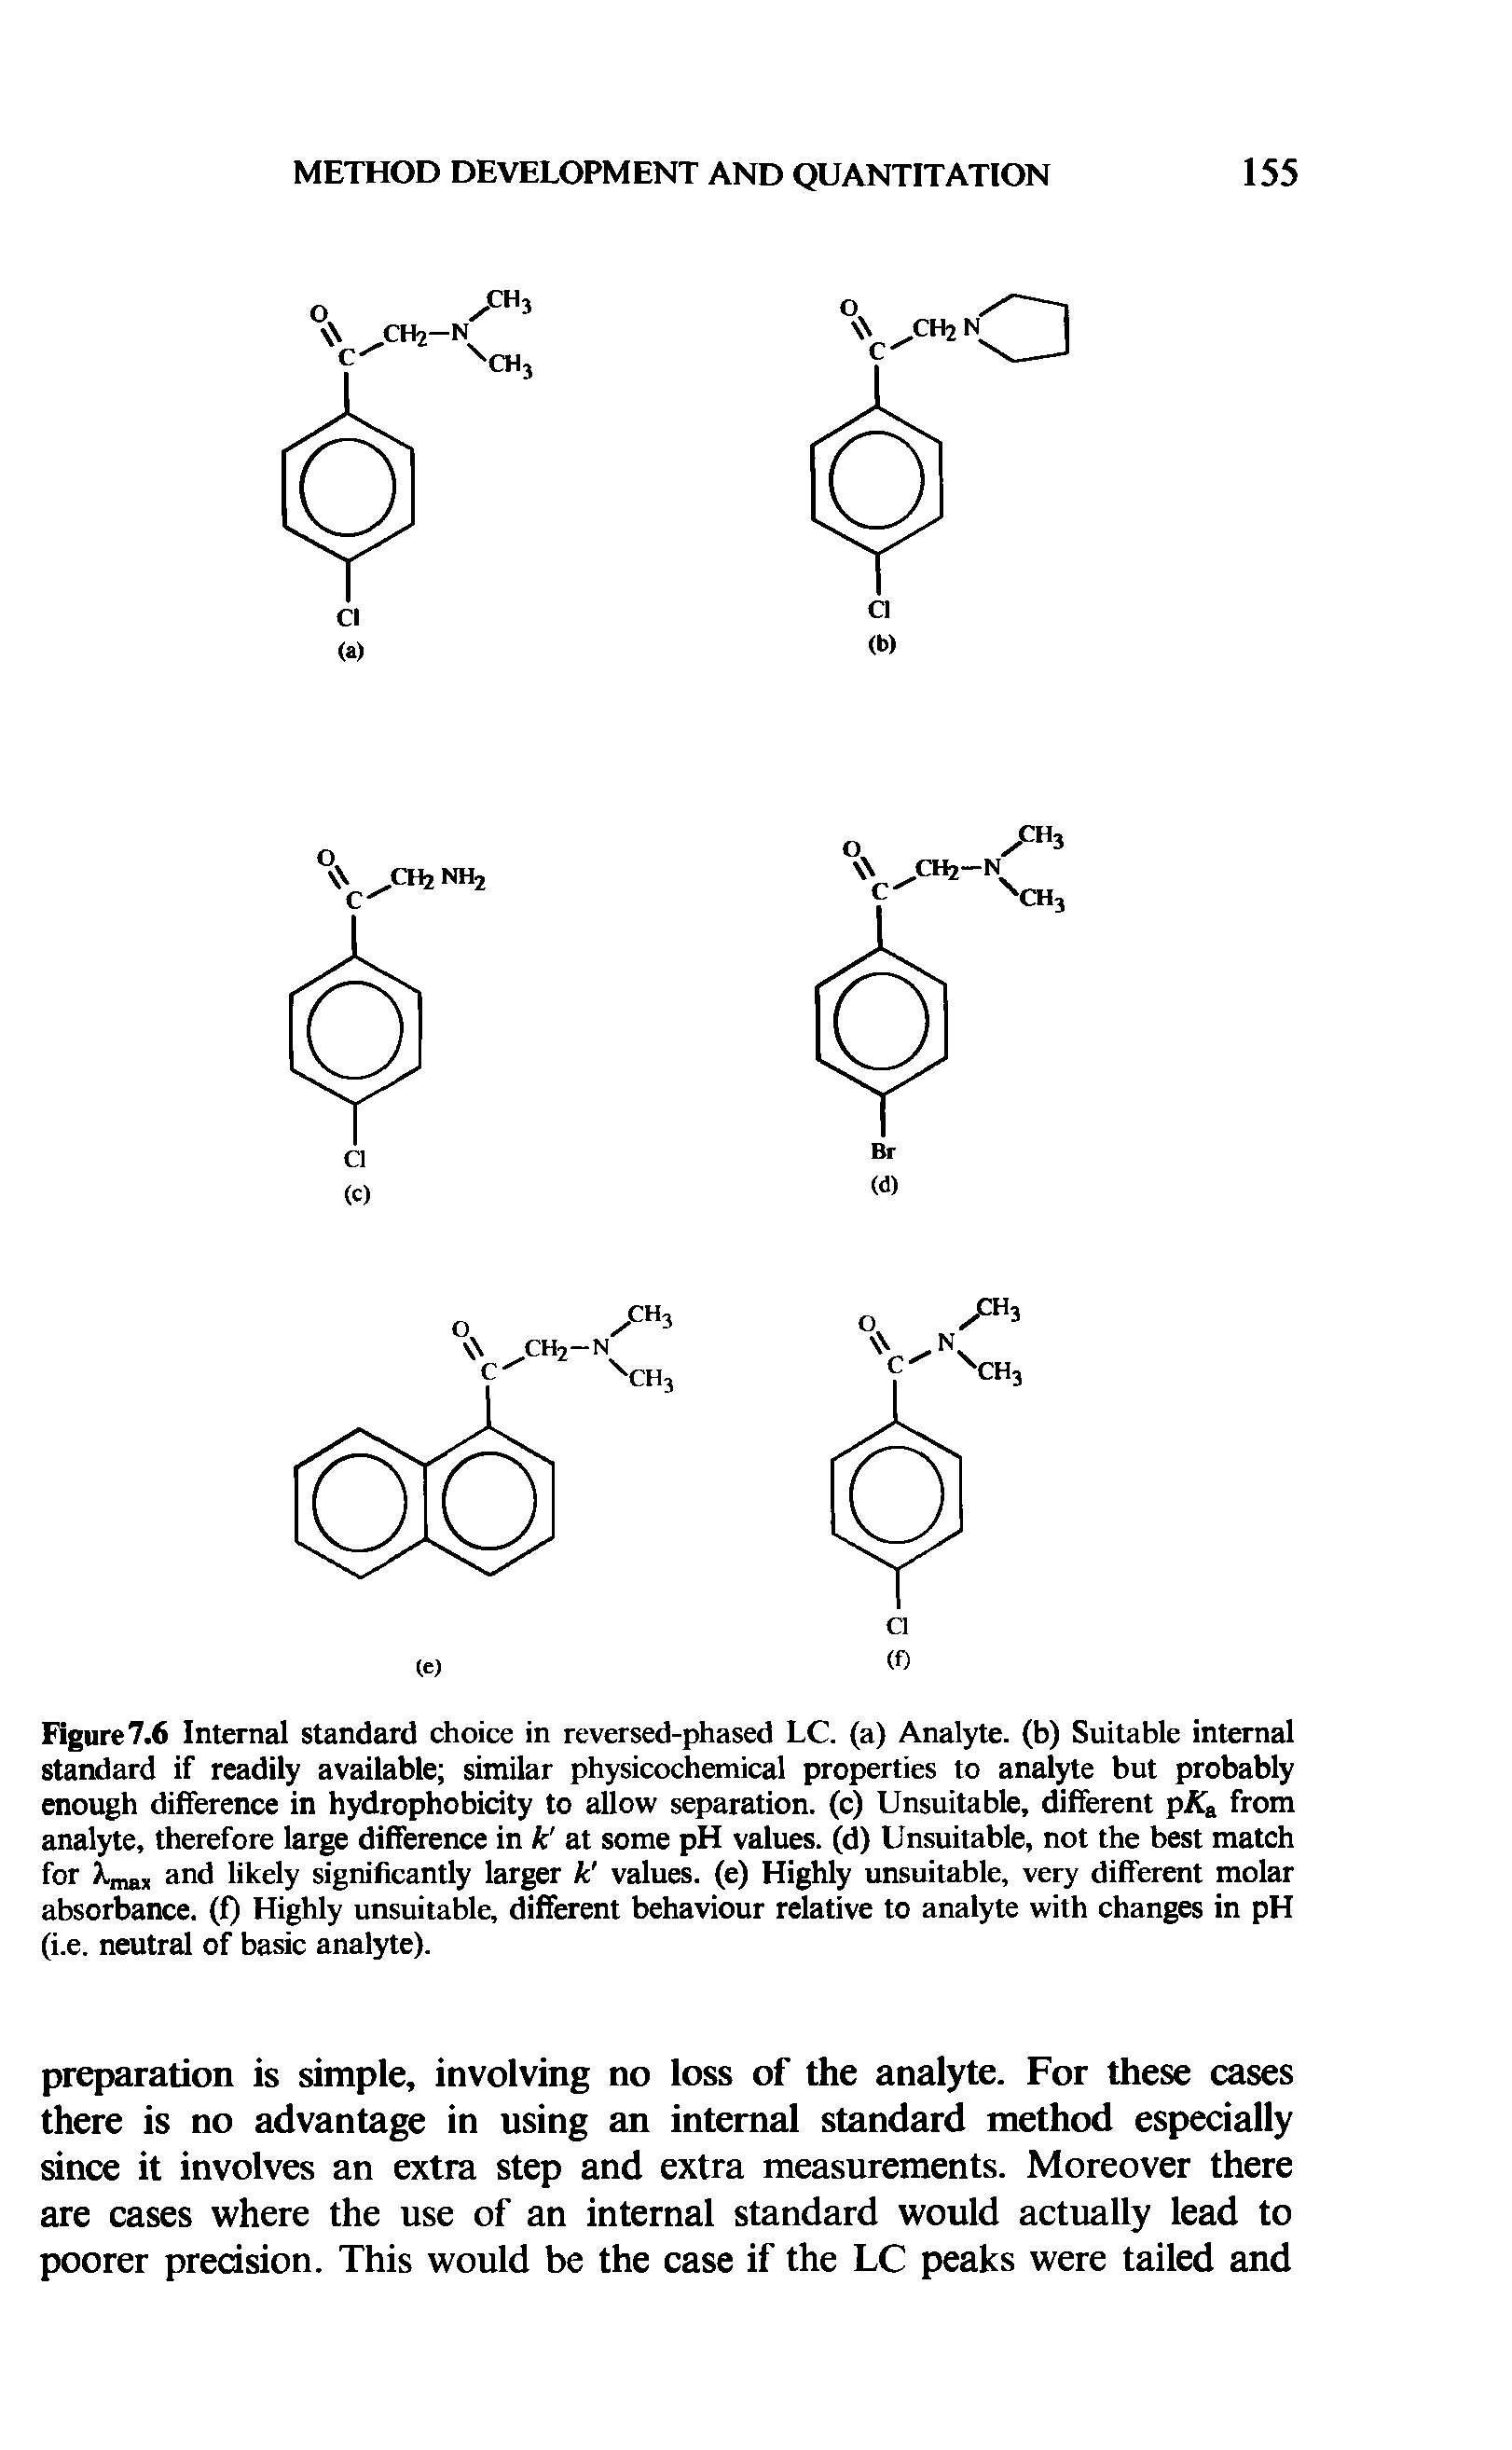 Figure 7.6 Internal standard choice in reversed-phased LC. (a) Analyte, (b) Suitable internal standard if readily available similar physicochemical properties to analyte but probably enough difference in hydrophobicity to allow separation, (c) Unsuitable, different pAg from analyte, therefore large difference in k at some pH values, (d) Unsuitable, not the best match for Lmaj and likely significantly larger k values, (e) Highly unsuitable, very different molar absorbance, (f) Highly unsuitable, different behaviour relative to analyte with changes in pH (i.e. neutral of basic analyte).